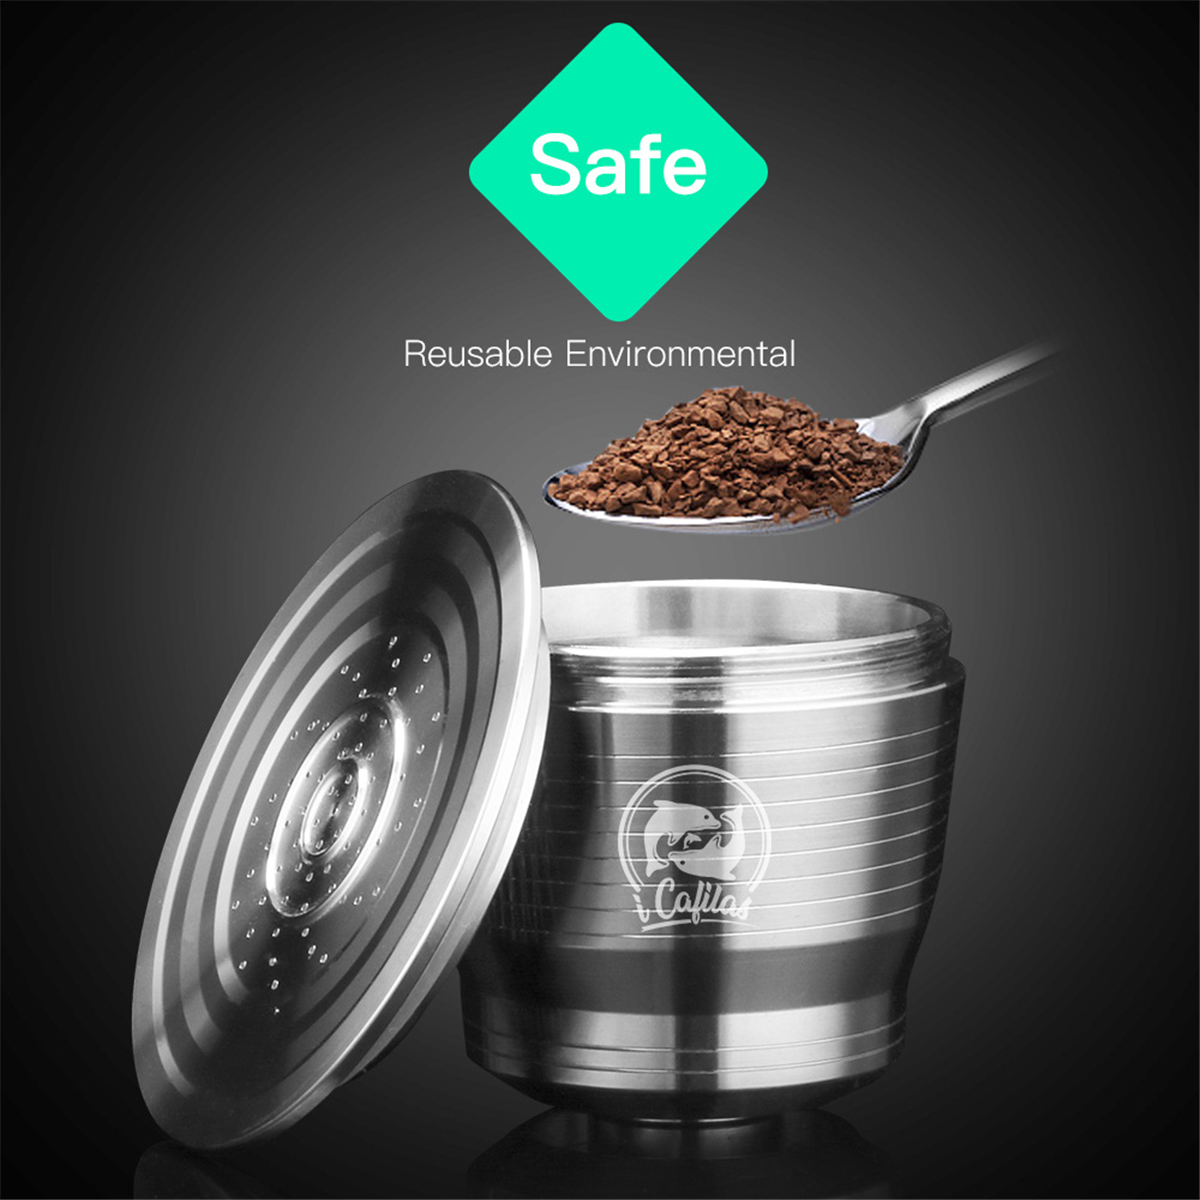 Stainless-Steel-Coffee-Capsule-Cup-Reusable-Refillable-Kit-For-Nespresso-U-Machine-1393441